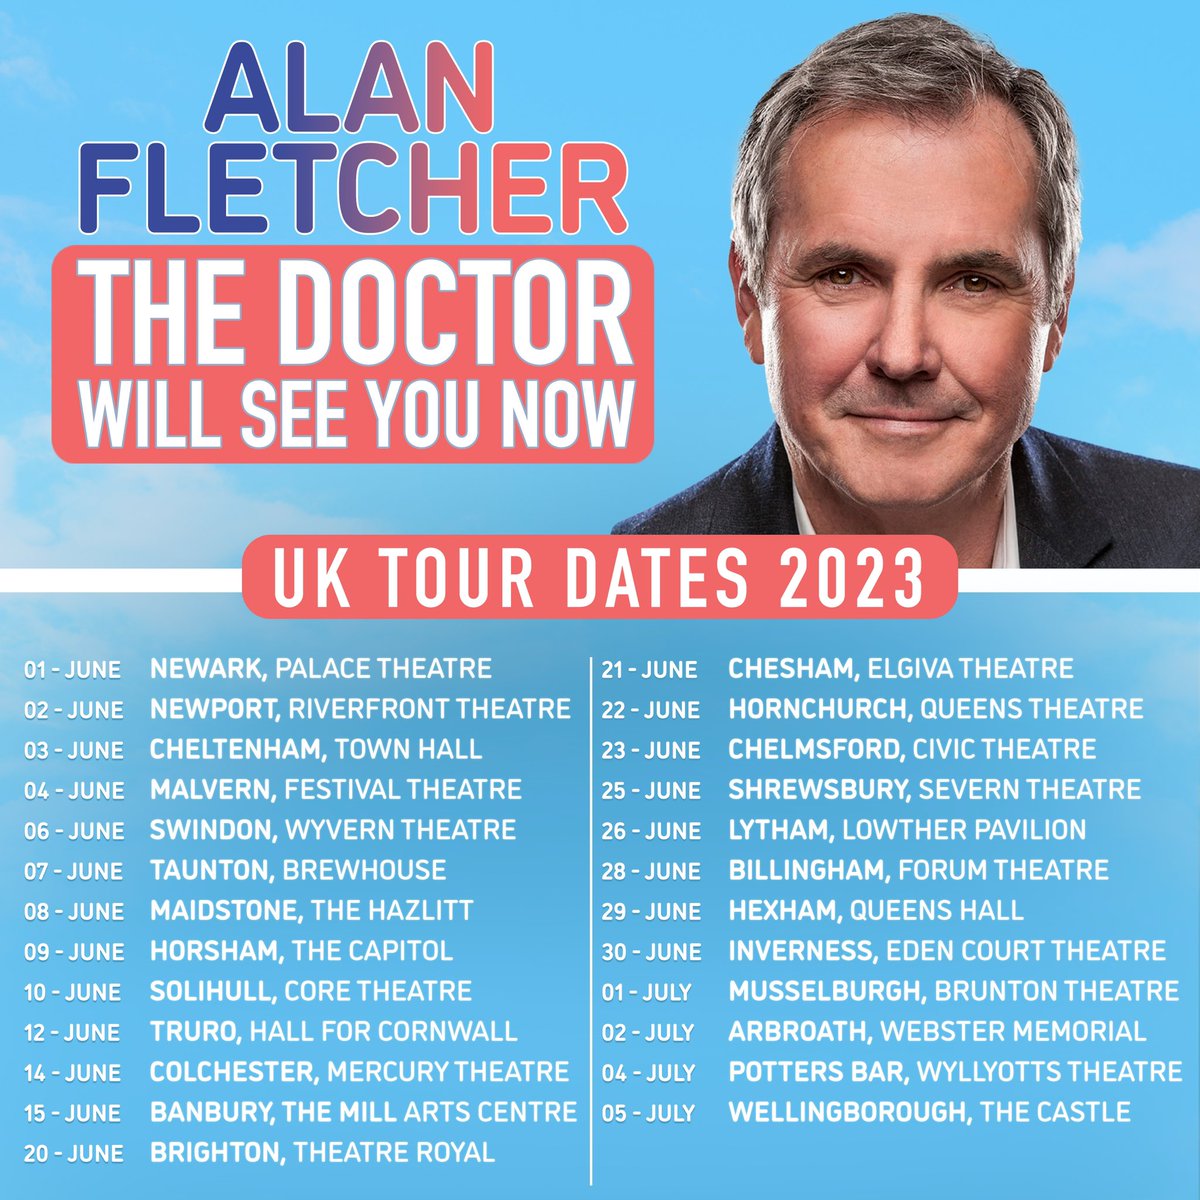 In just 18 days I return to the UK to tour my DR Karl Kennedy show- the Doctor Will See You Now. This is a show packed with @neighbours clips, music and fun chat about my time on the iconic show. Love to see you on my travels. Tickets at alanfletcher.net